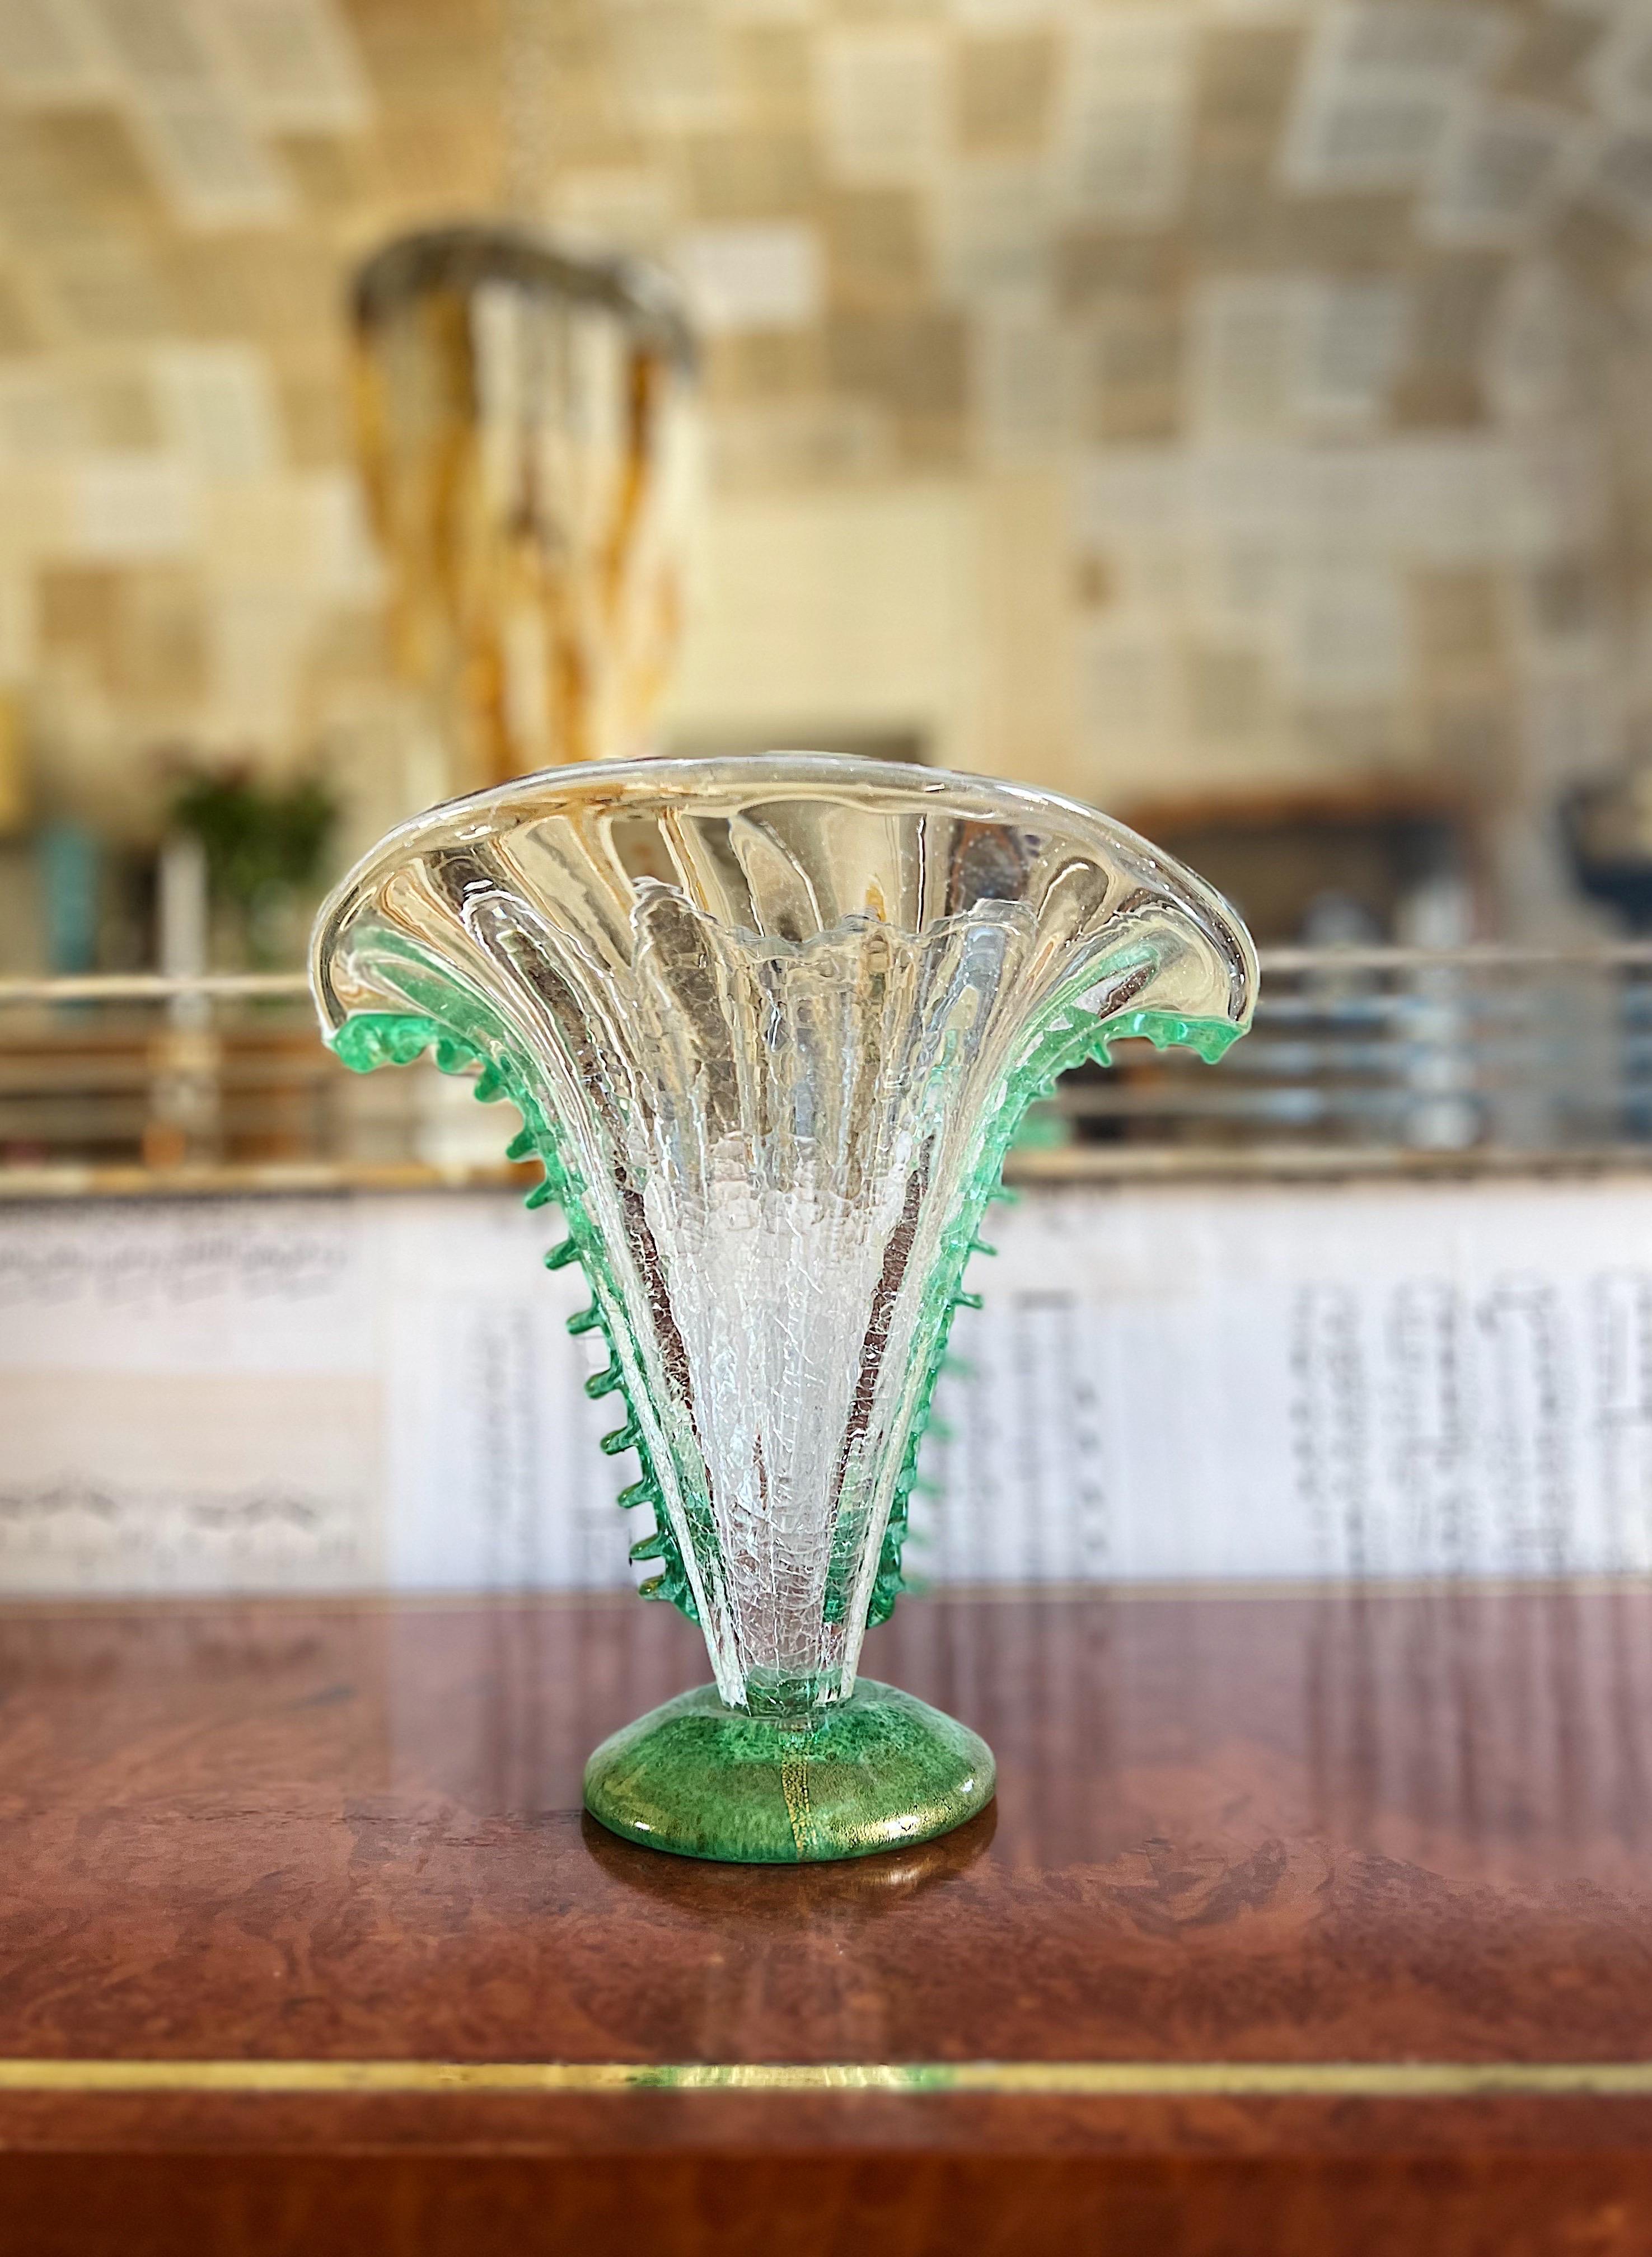 20th Century Barovier and Toso Vase in “Bullicante” Venetian Crystal Glass Murano, 1930s For Sale